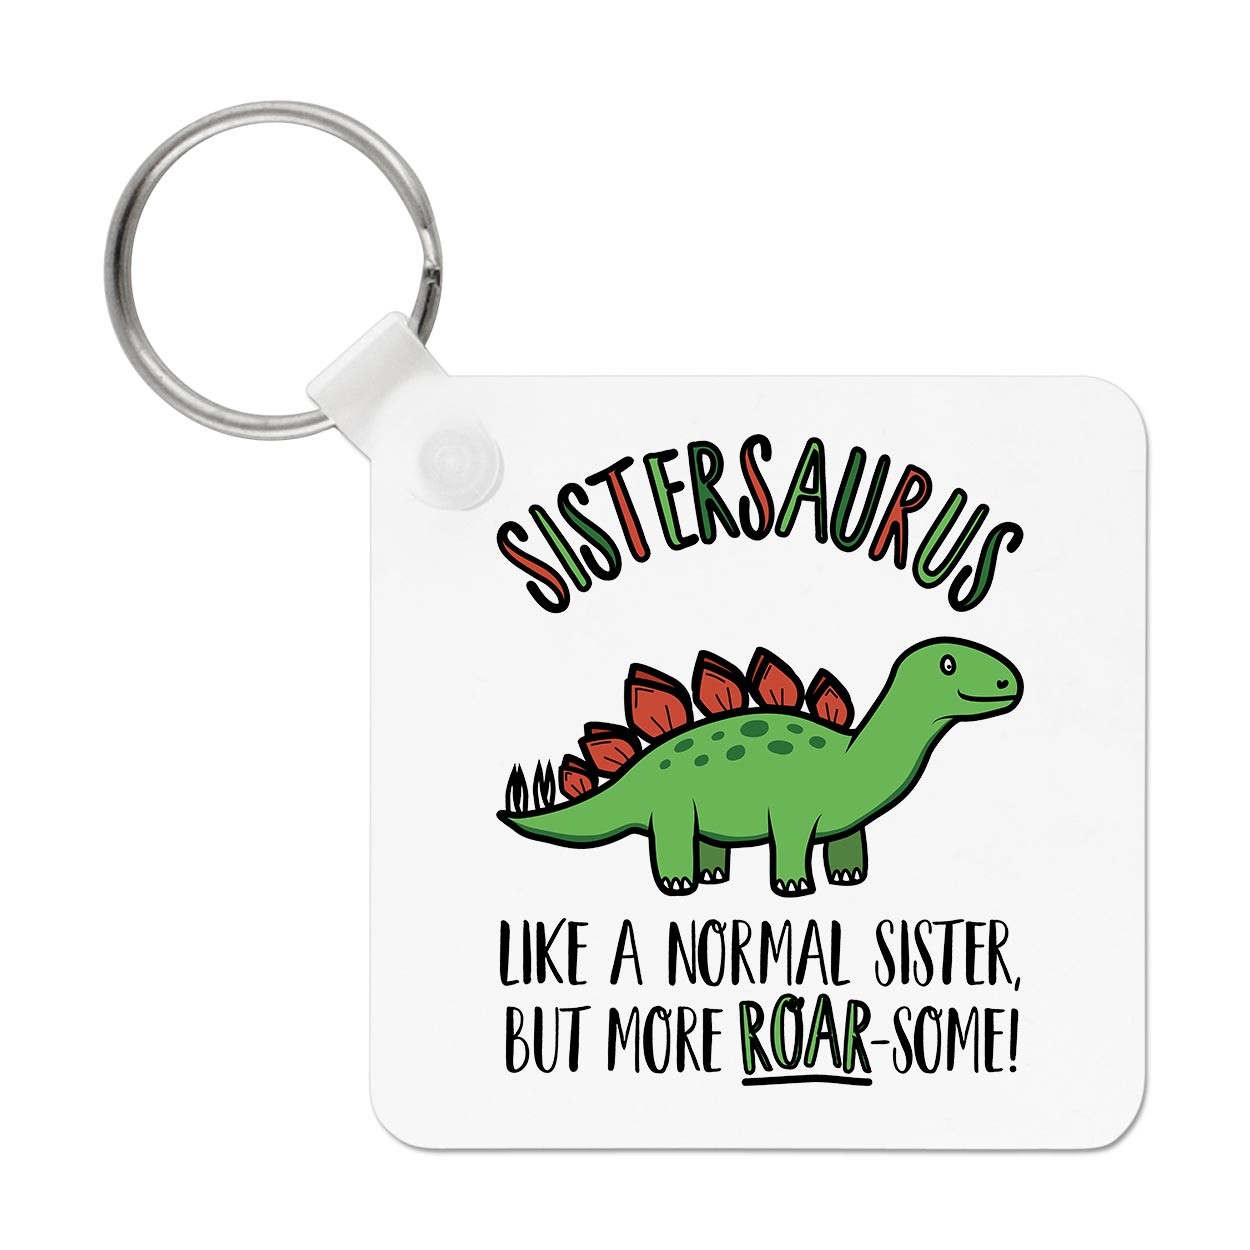 Sistersaurus Dinosaur Like A Normal Sister But More Roarsome Keyring Key Chain